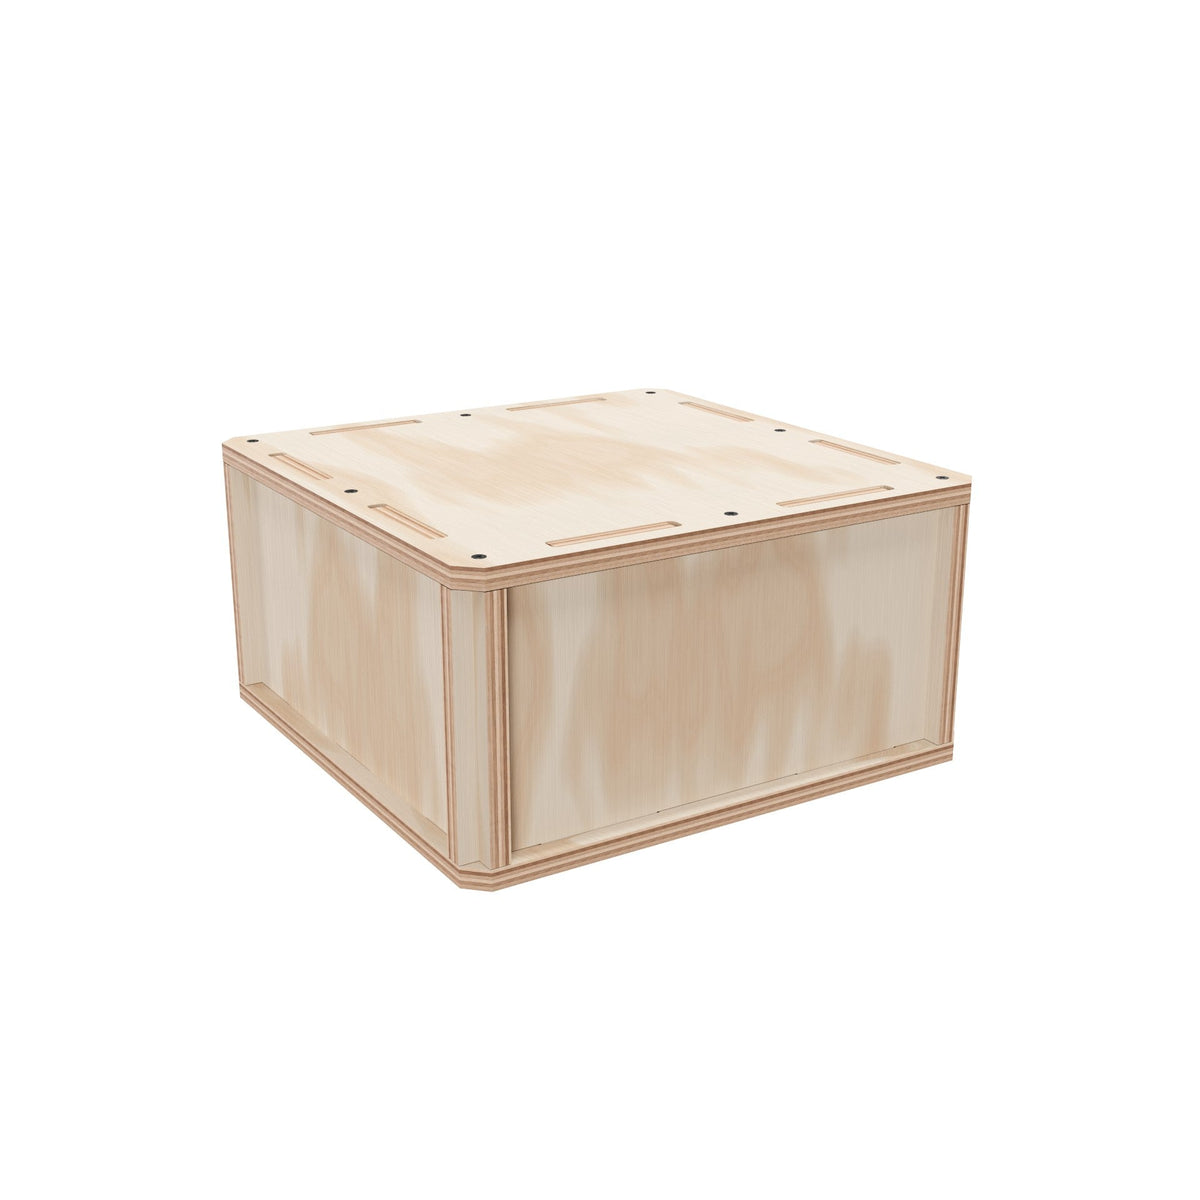 Plywood Shipping Crate 14x14x7